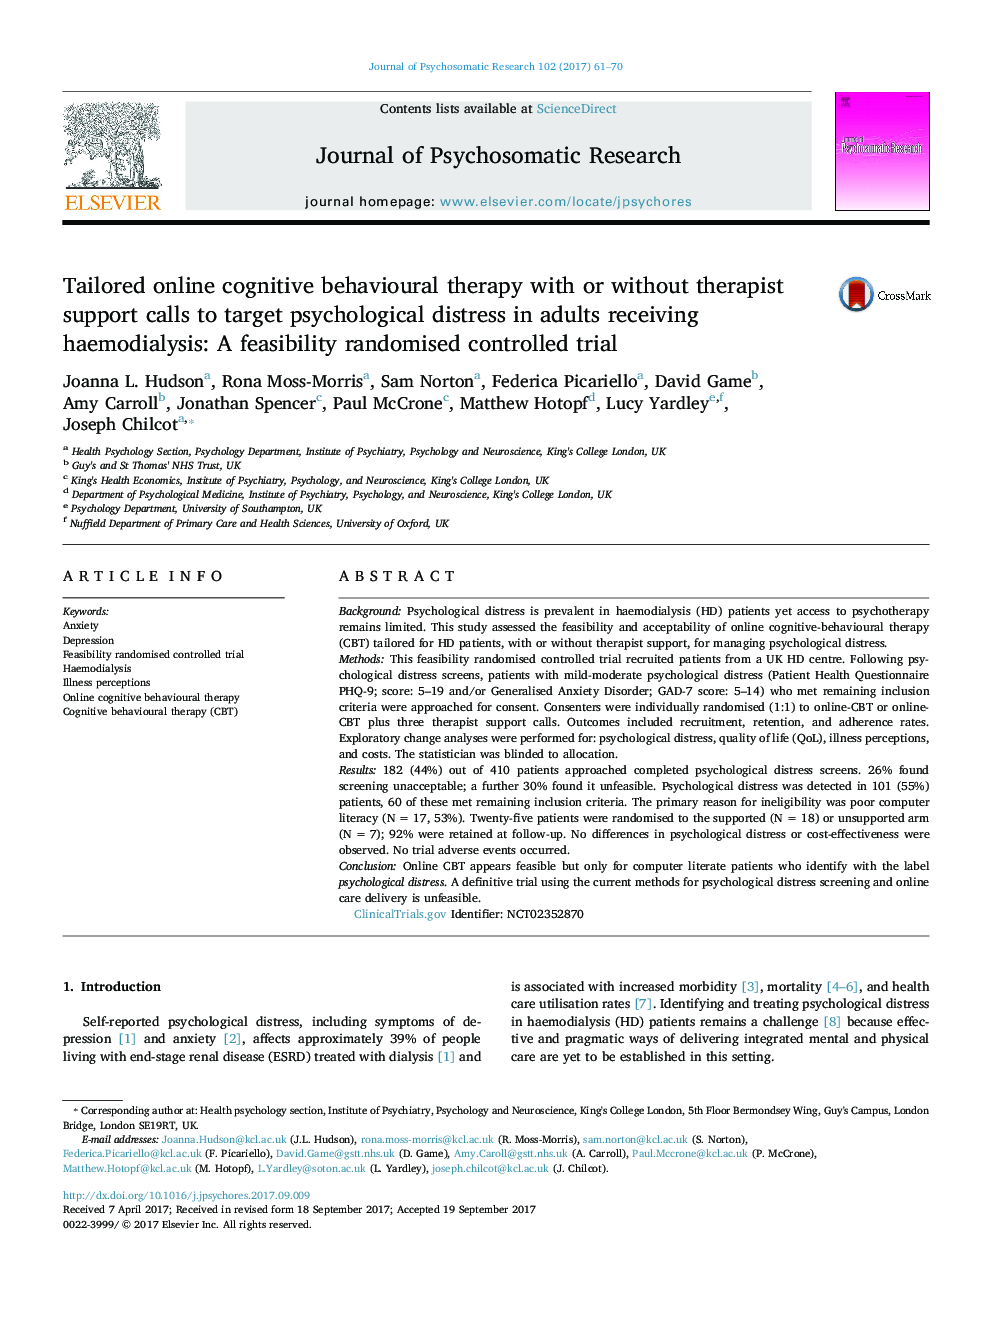 Tailored online cognitive behavioural therapy with or without therapist support calls to target psychological distress in adults receiving haemodialysis: A feasibility randomised controlled trial